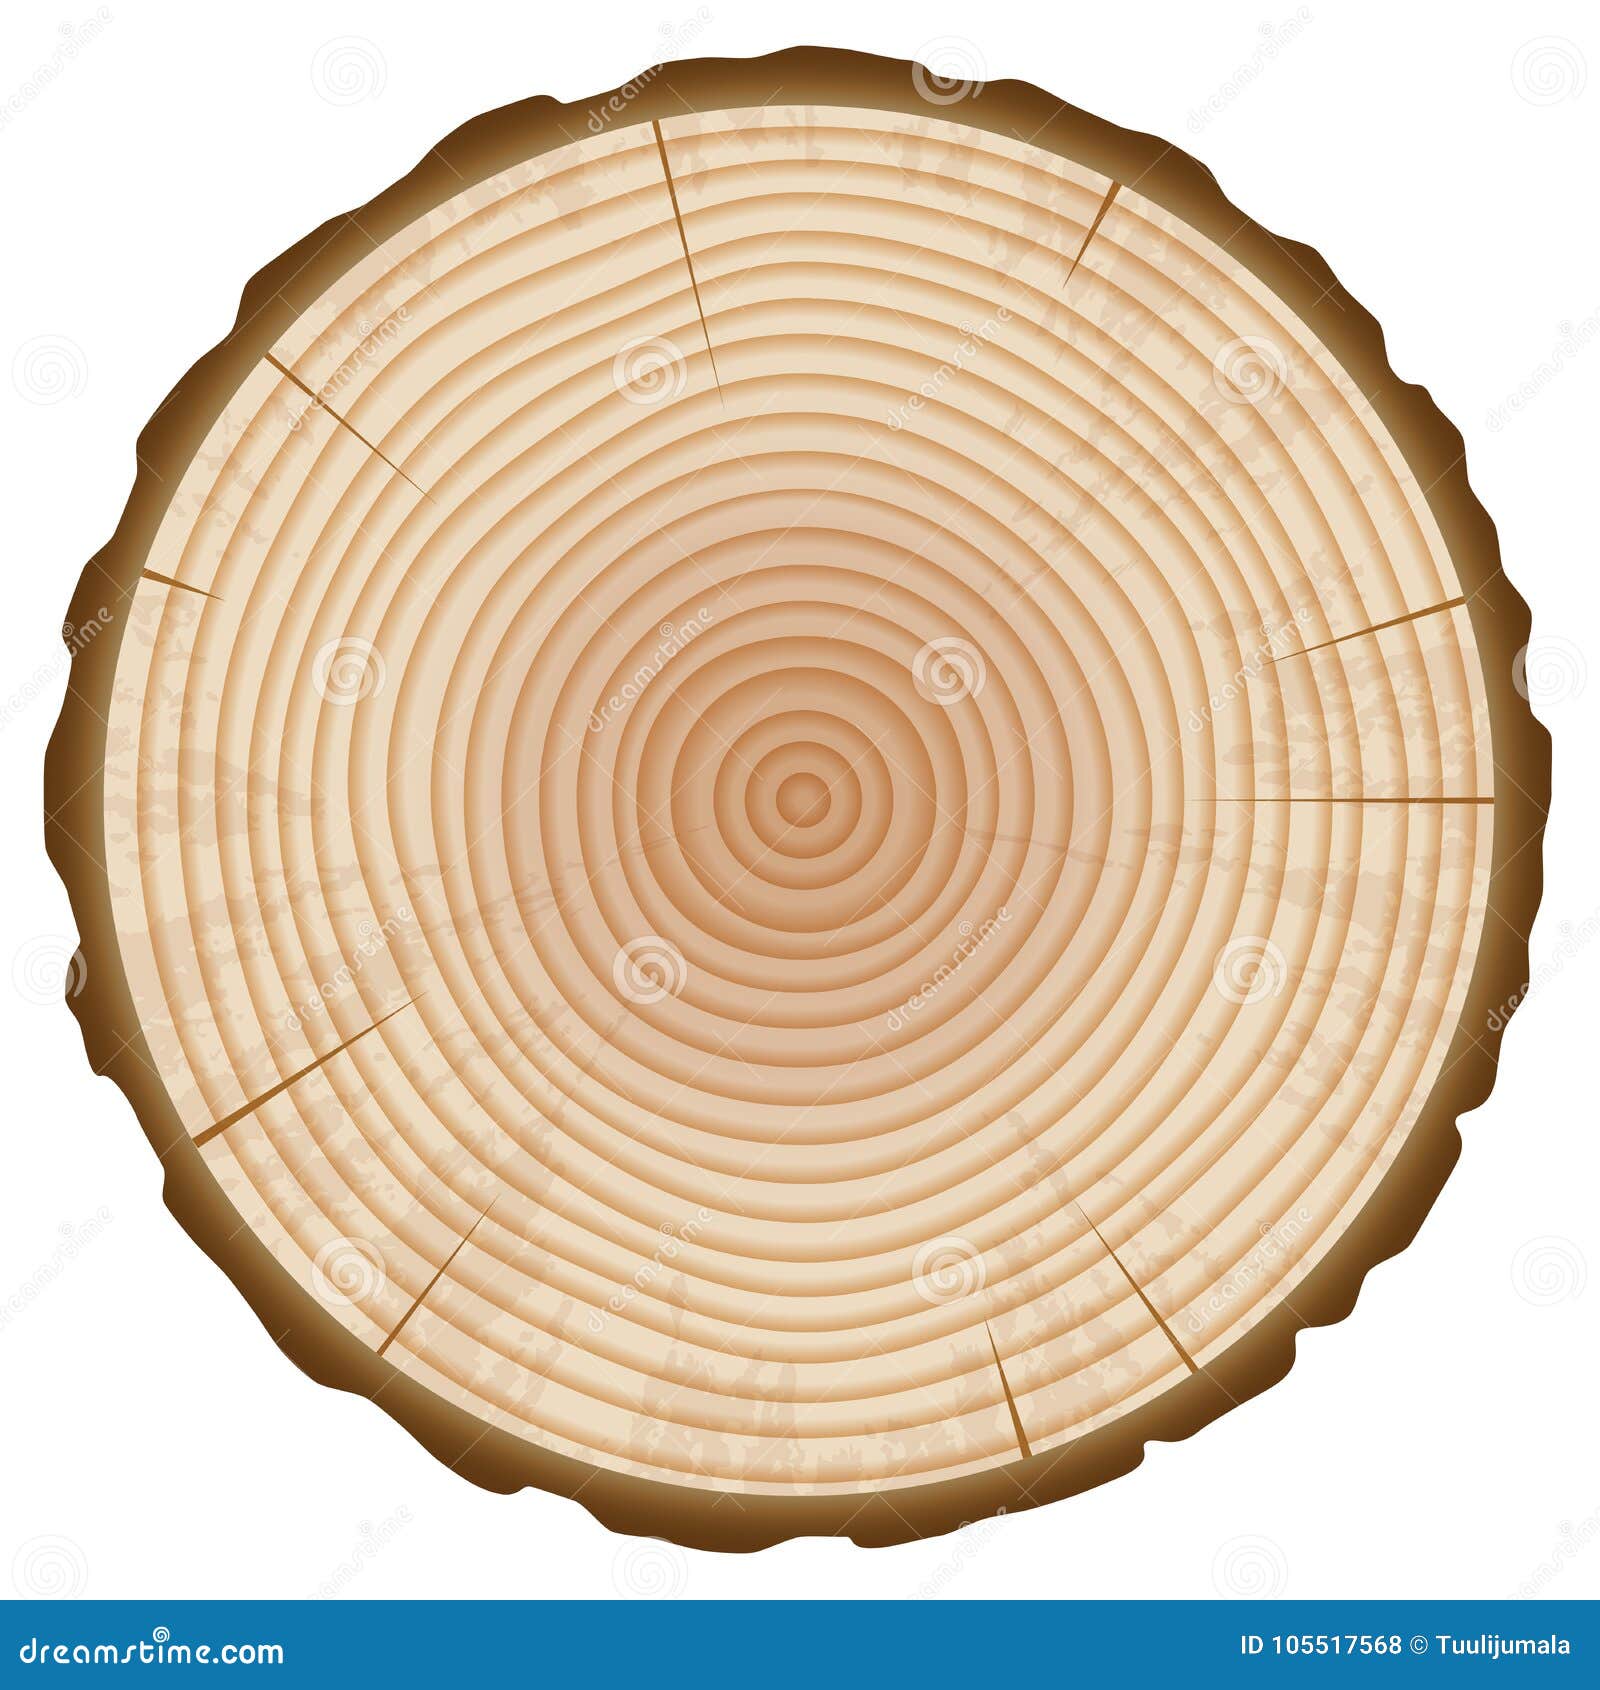 How tree rings help date archaeological sites